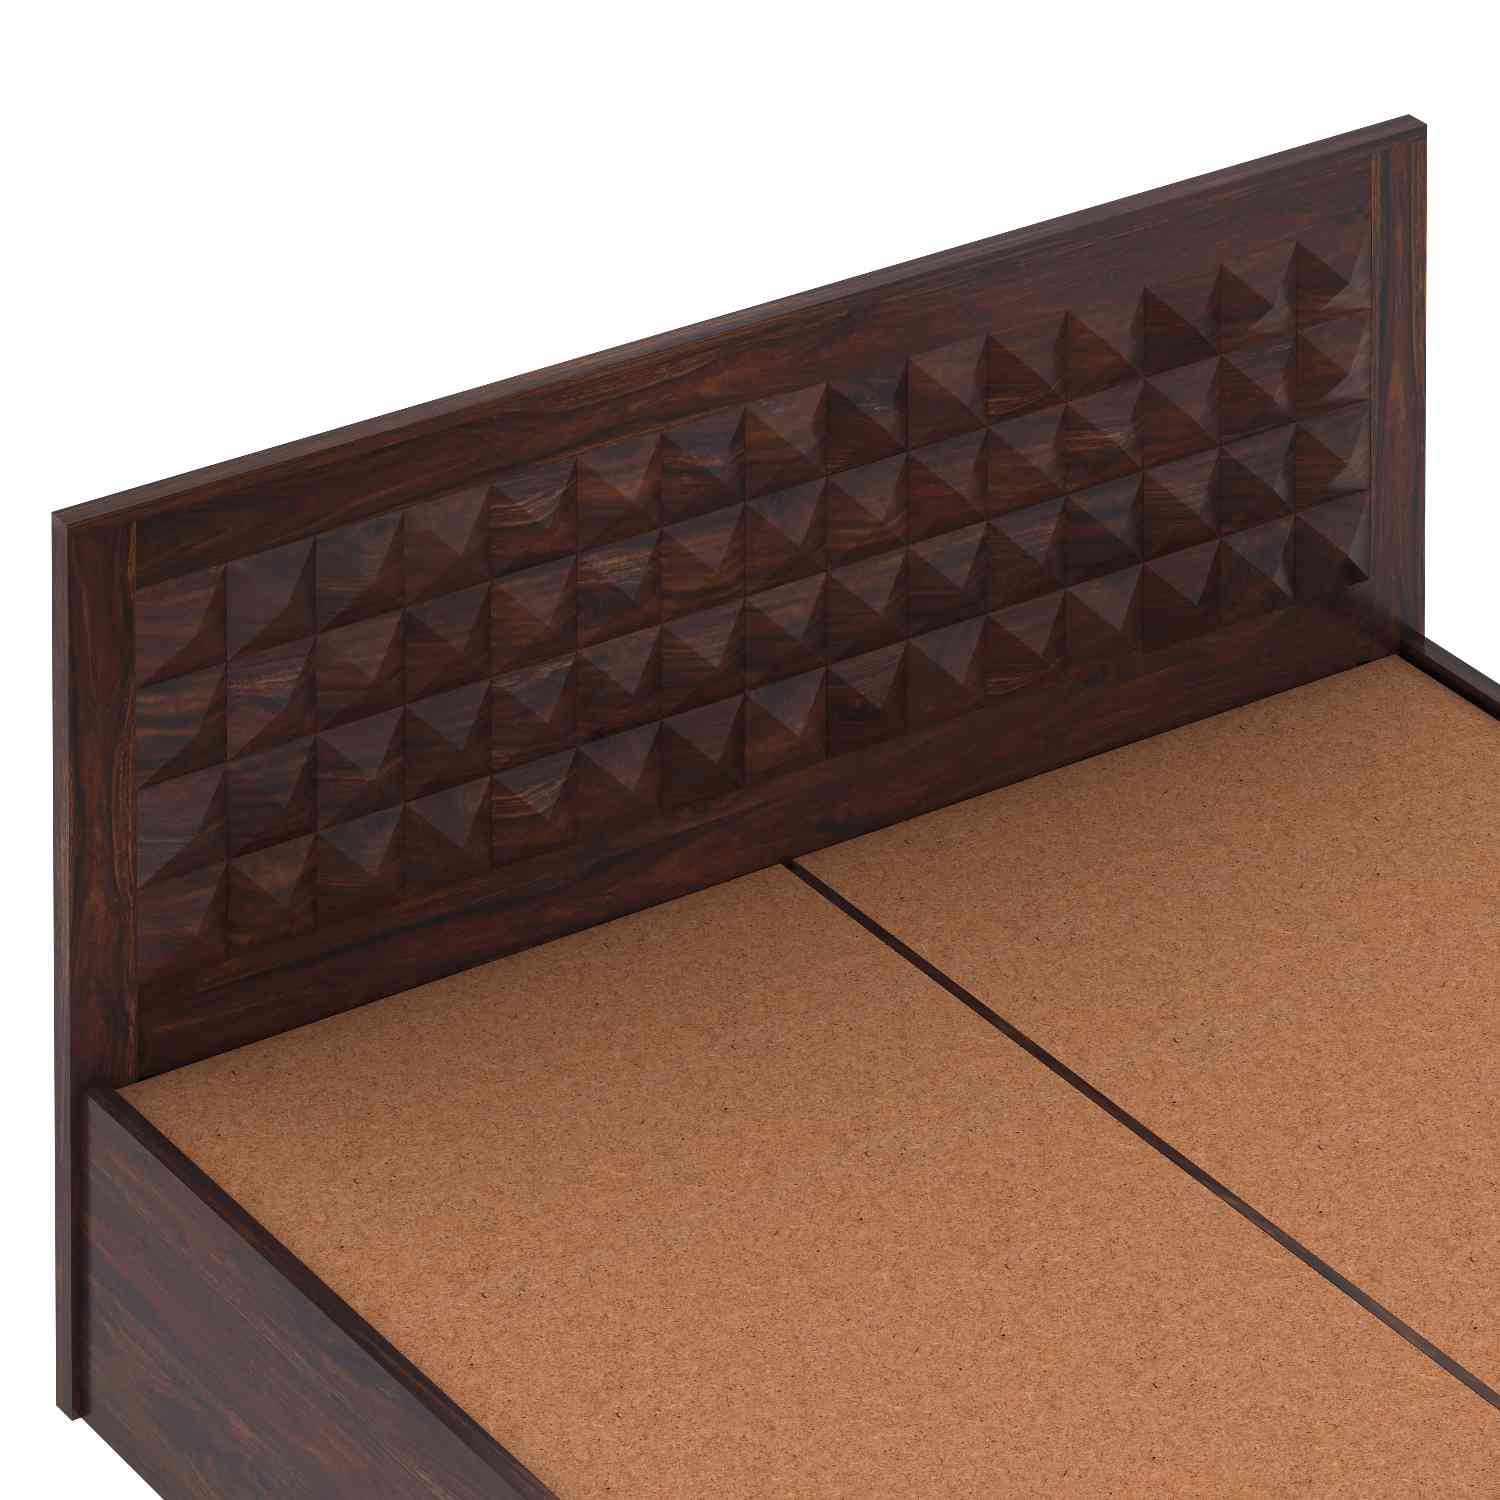 Sofia Solid Sheesham Wood Bed With Box Storage (Queen Size, Walnut Finish)